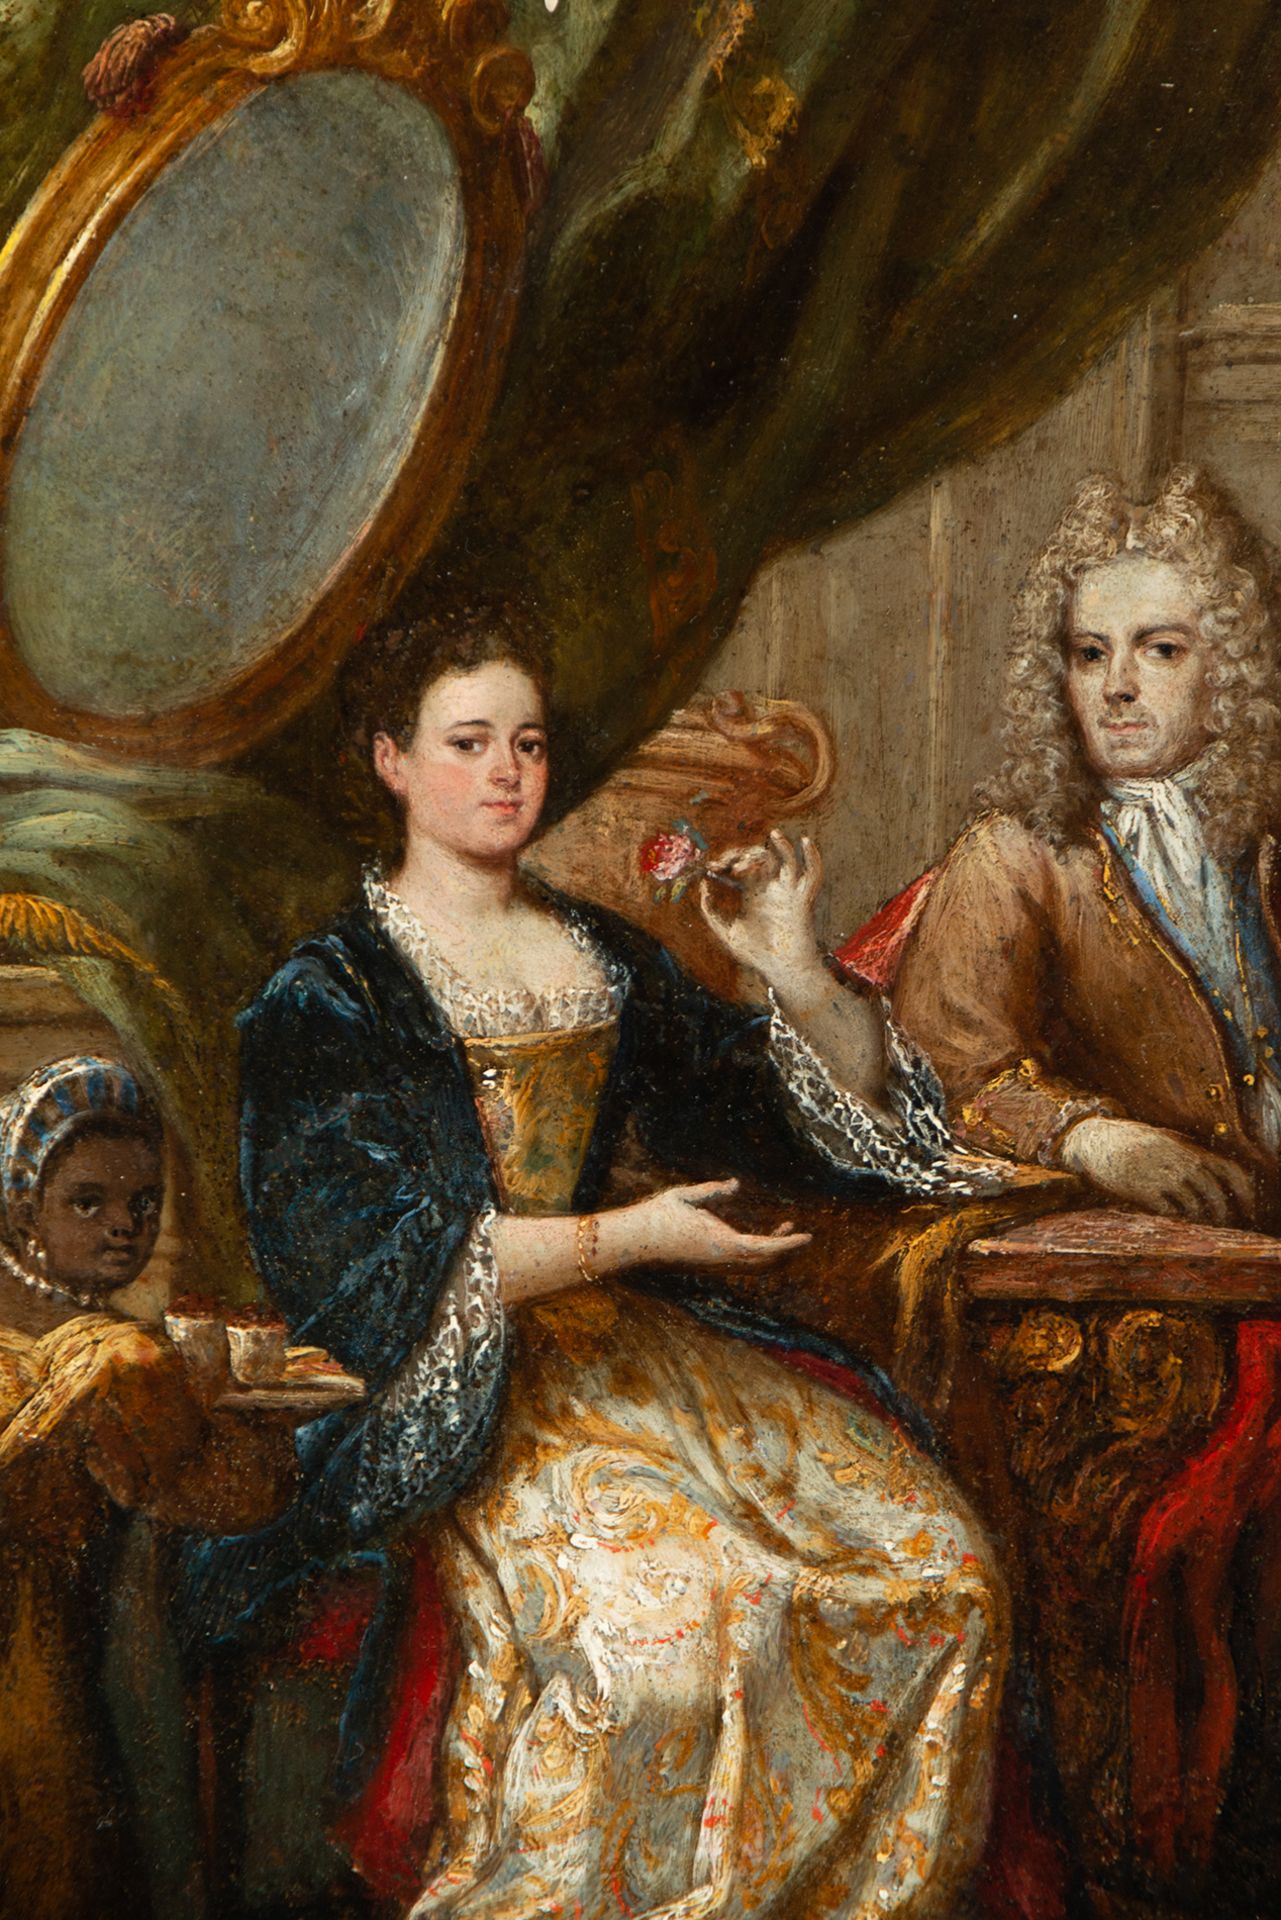 Couple of Nobles with a Maid, possibly New Spain colonial school from the 18th century - Image 2 of 4